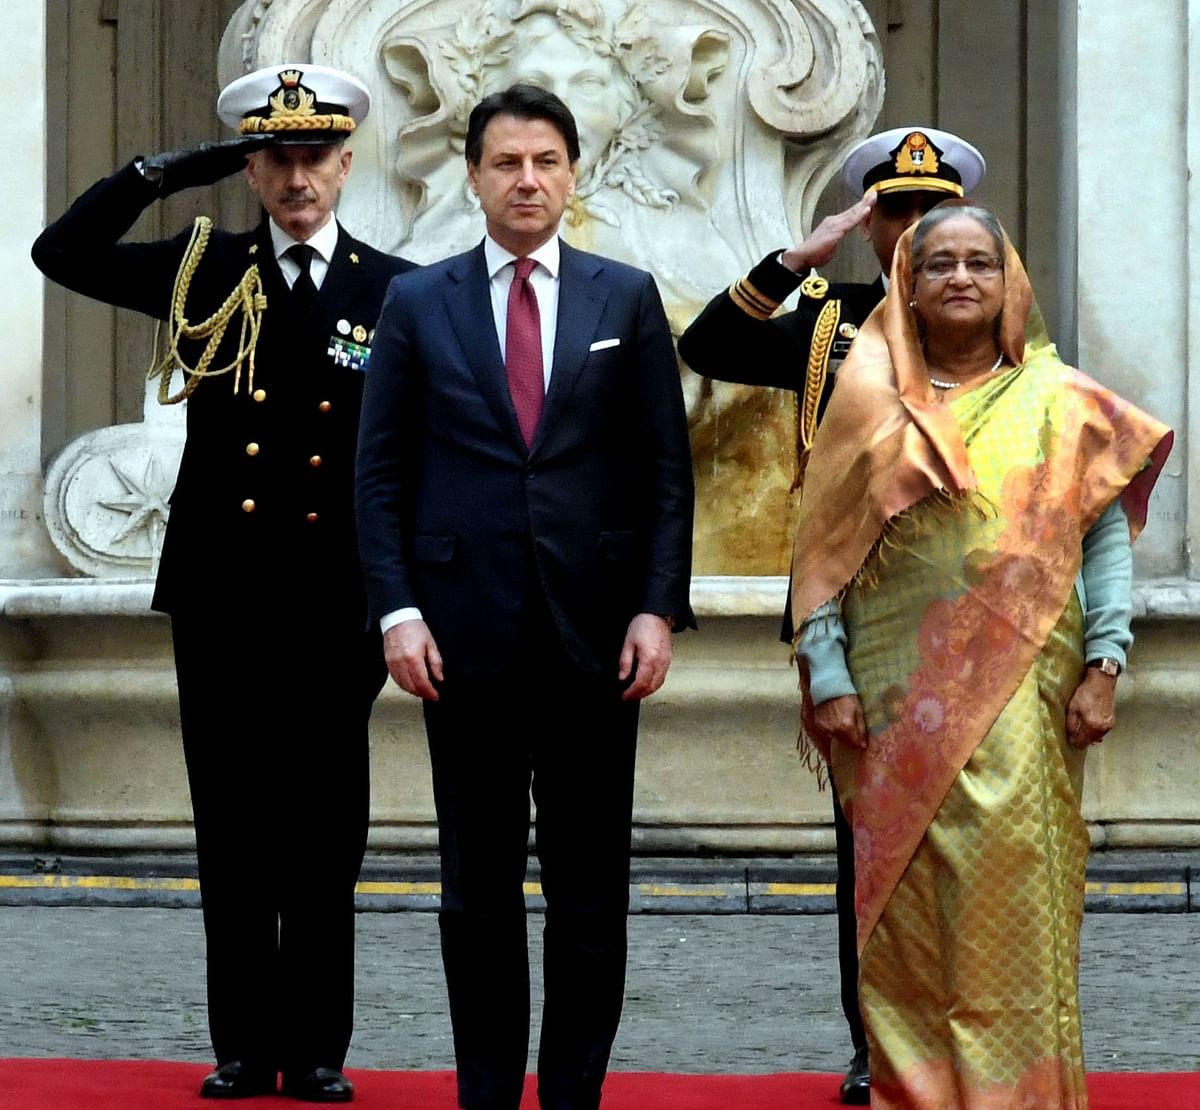 Prime minister Sheikh Hasina was given guard of honour at Palazzo Chigi, the official residence of the Italian prime minister, in Rome, Italy on 5 February 2020. Photo: PID